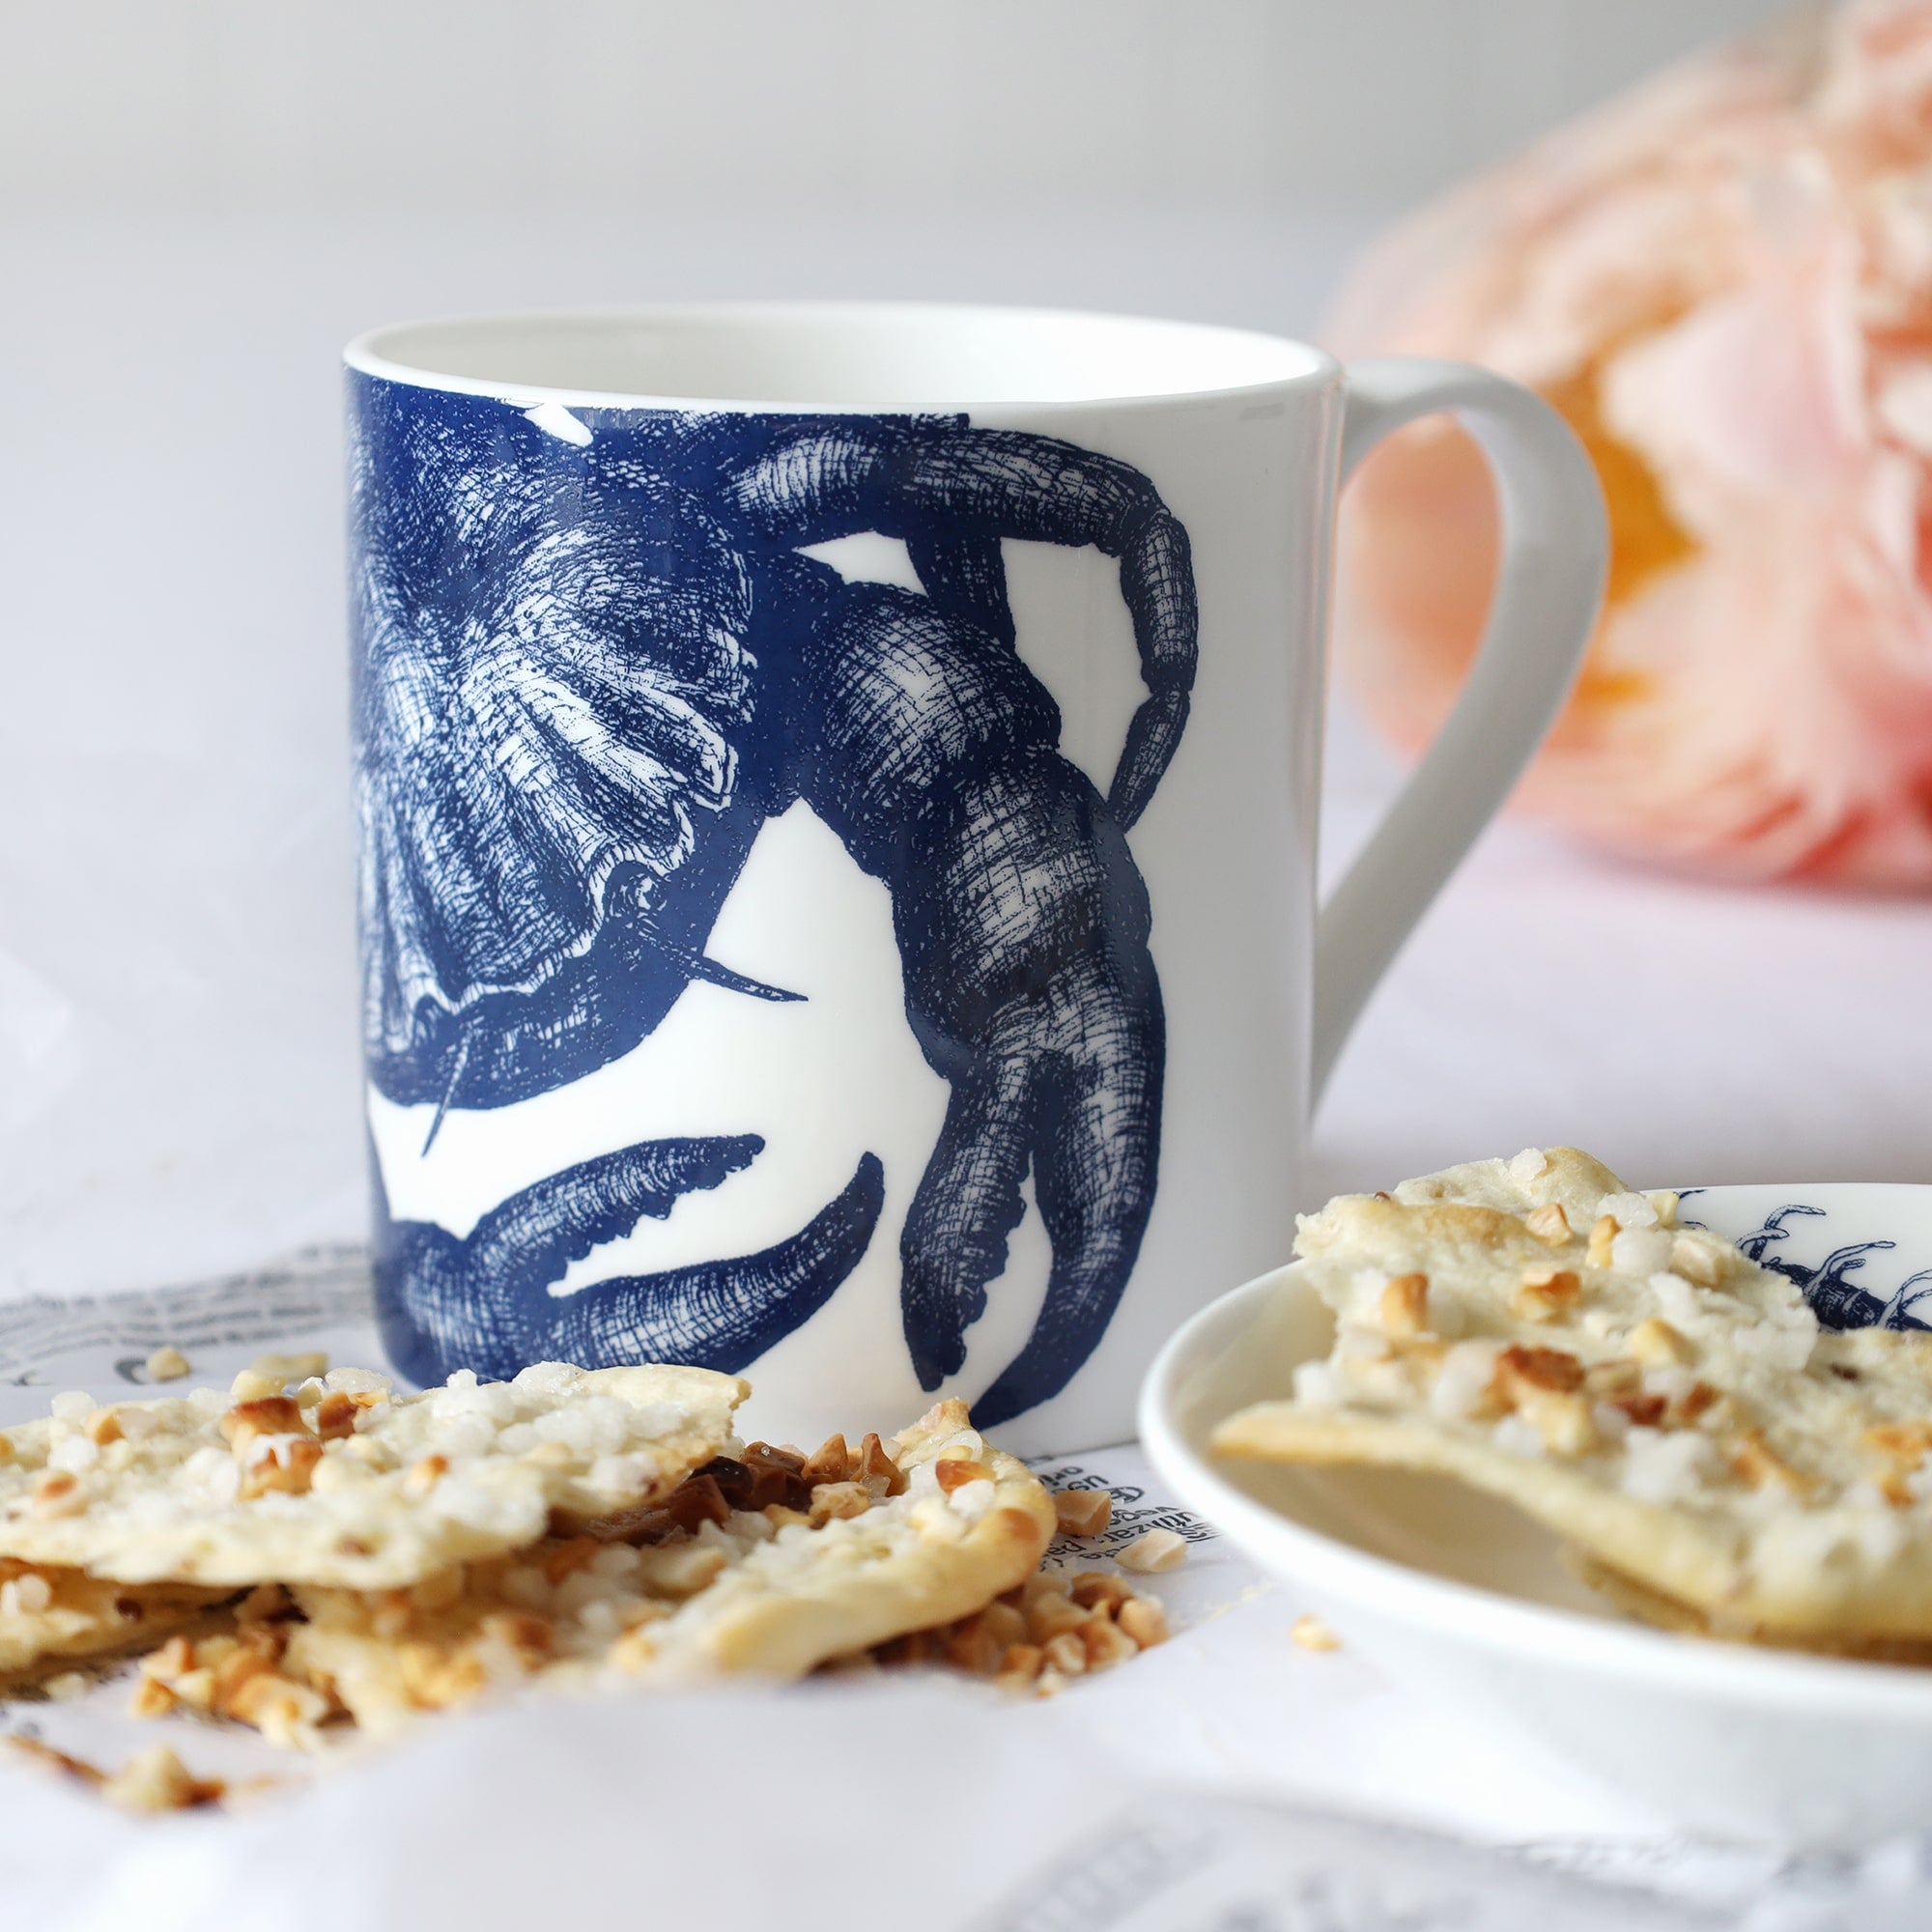 White mug with dark blue crab illustration sitting on a table with a plate & biscuits and flowers in the background.